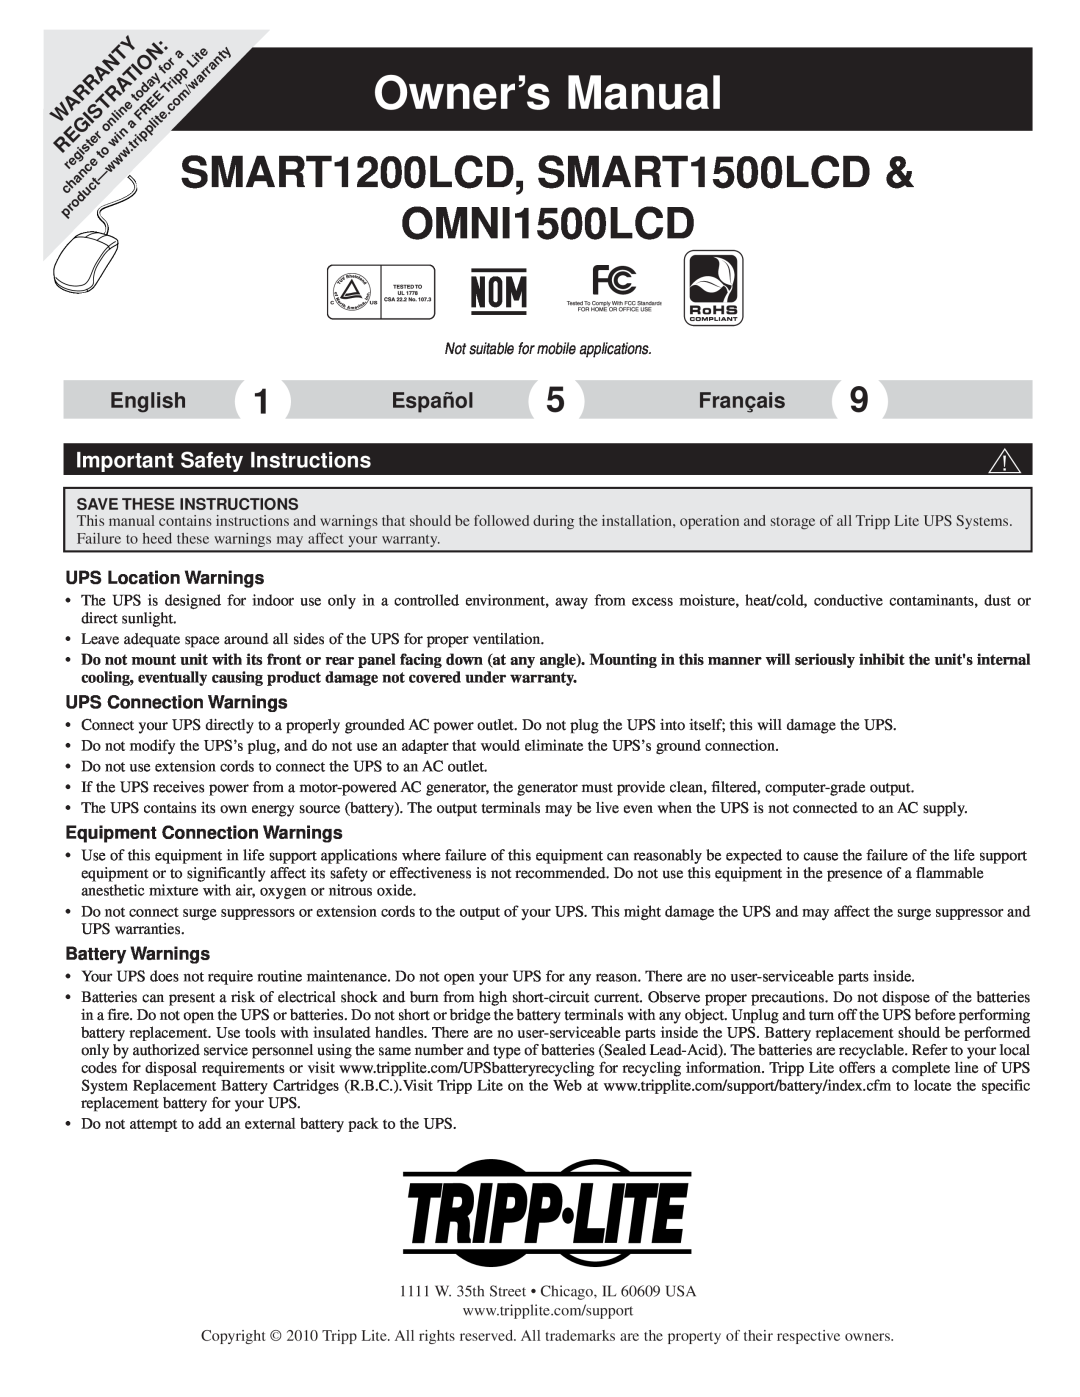 Tripp Lite OMNI1500LCD owner manual Important Safety Instructions, UPS Location Warnings, UPS Connection Warnings, English 